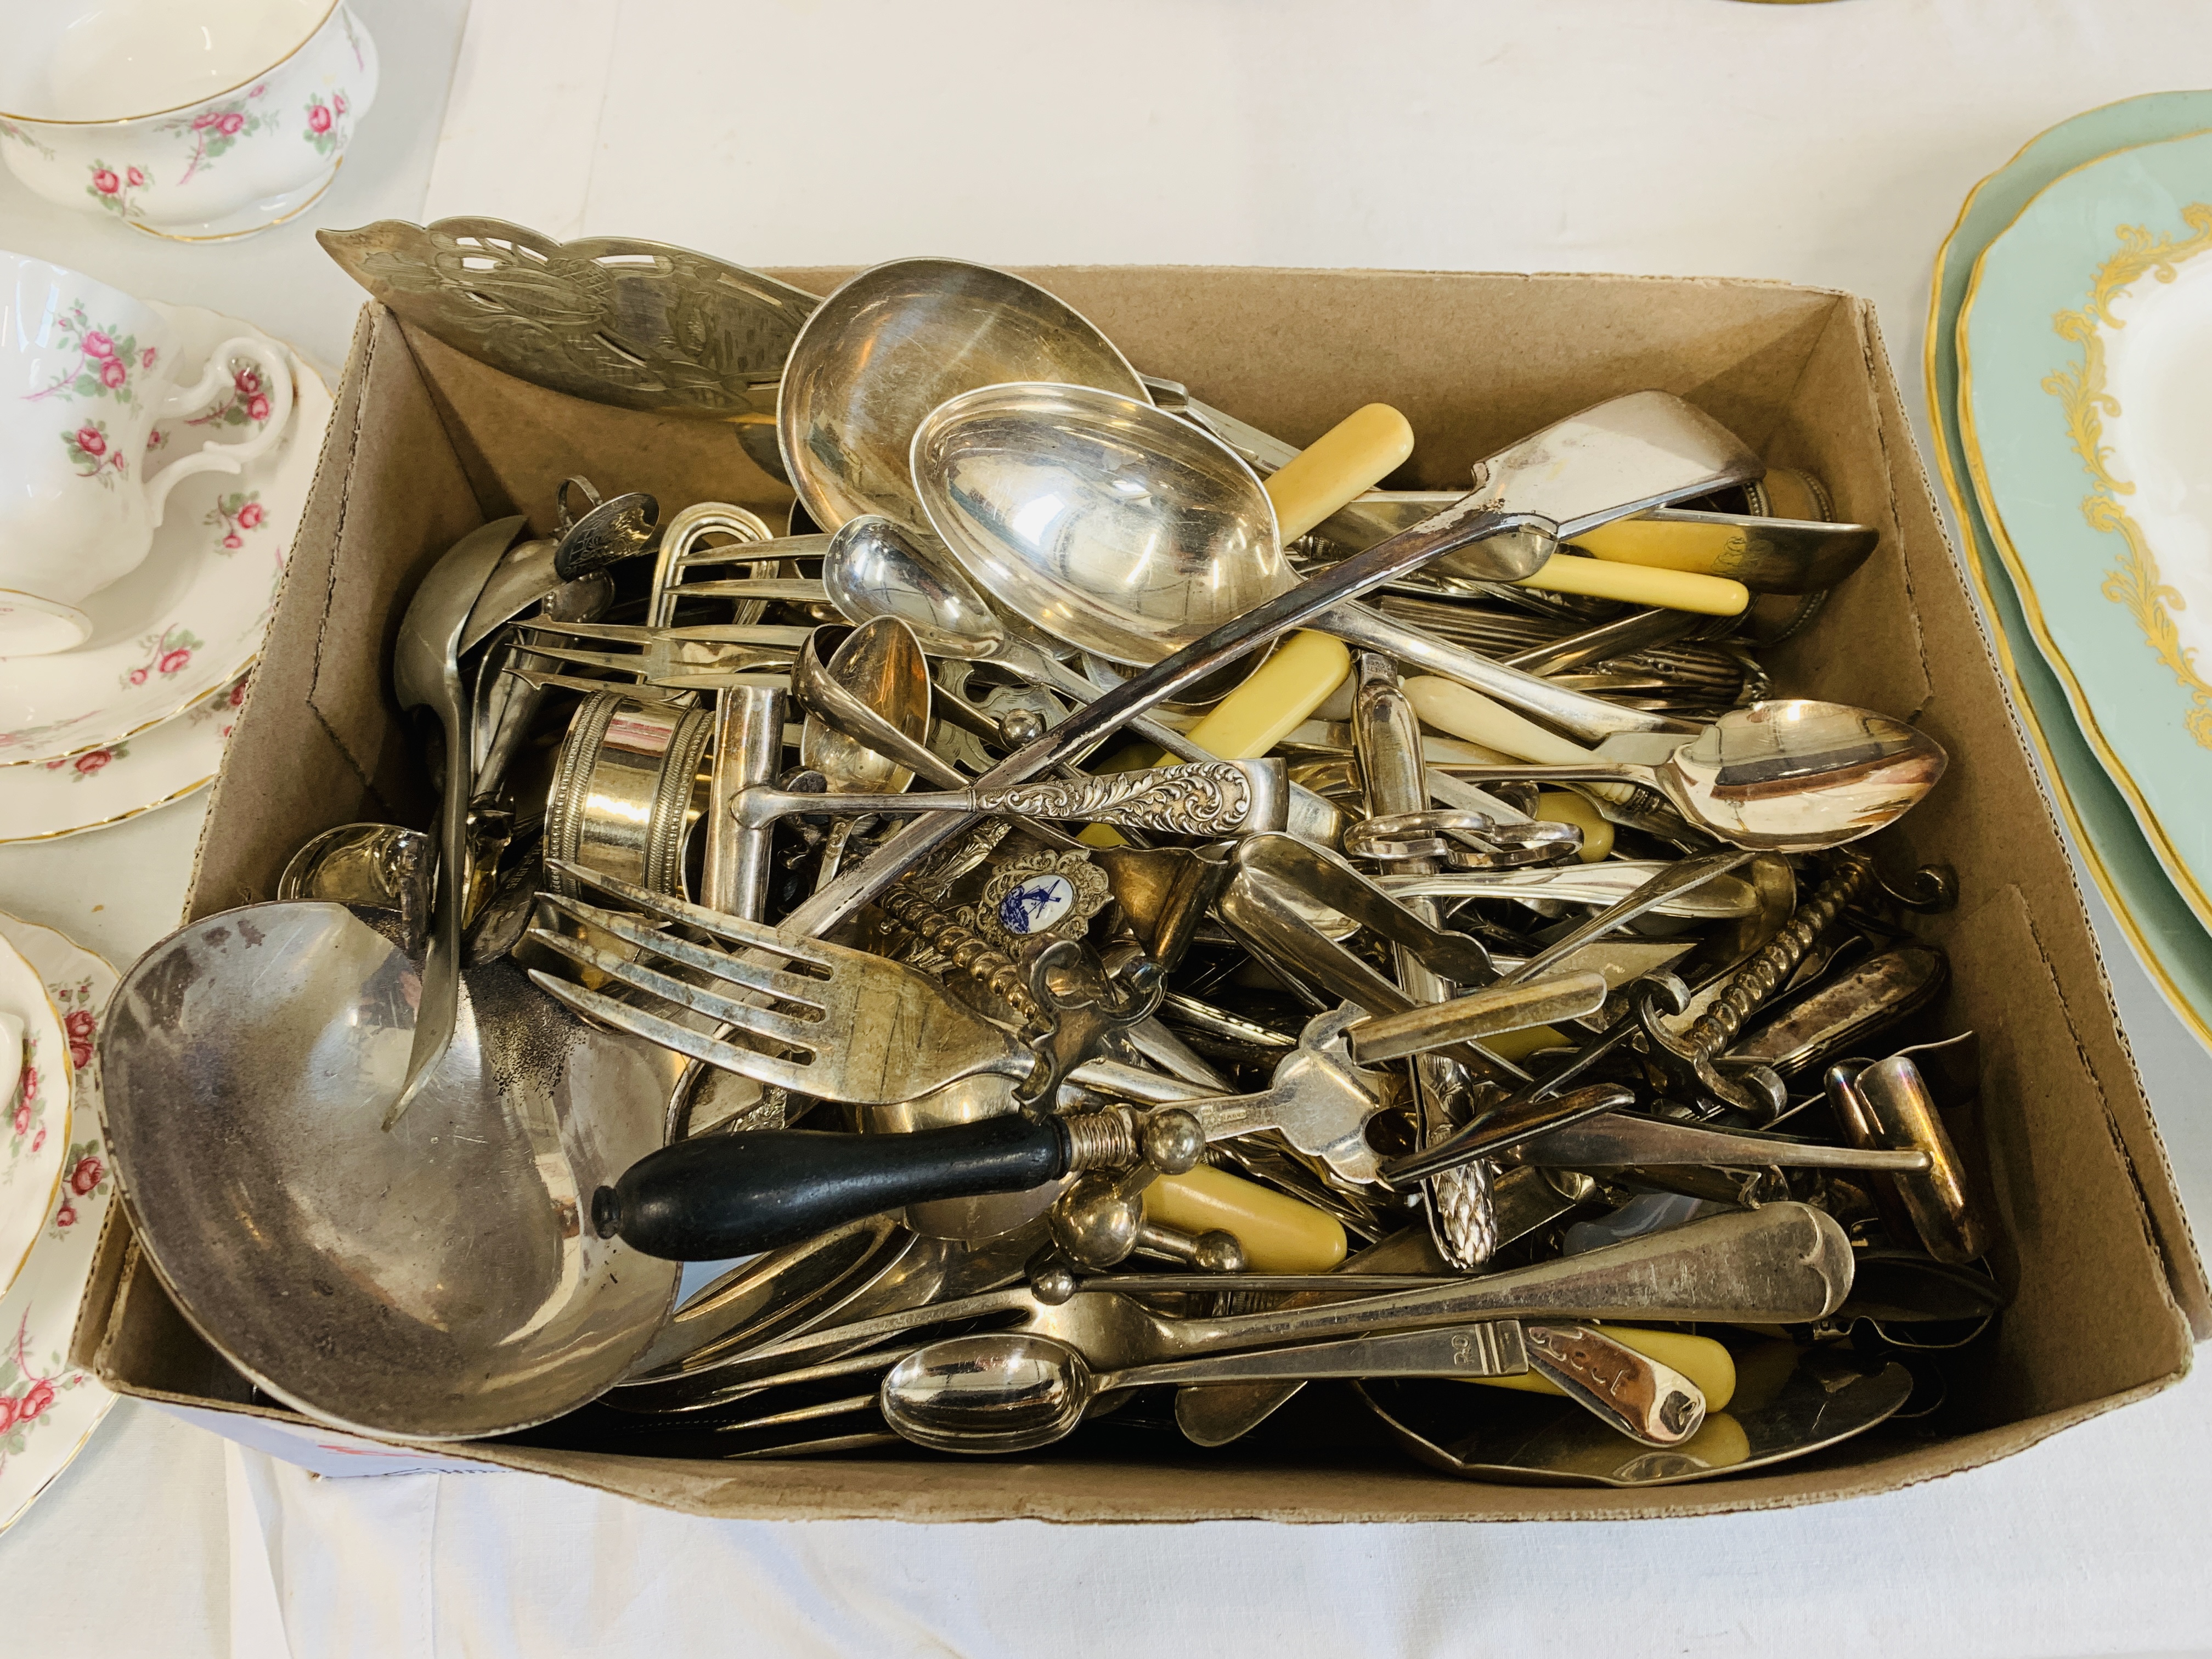 A QUANTITY OF ASSORTED SILVER PLATED CUTLERY, SERVERS, LADLE ETC. - Image 2 of 2